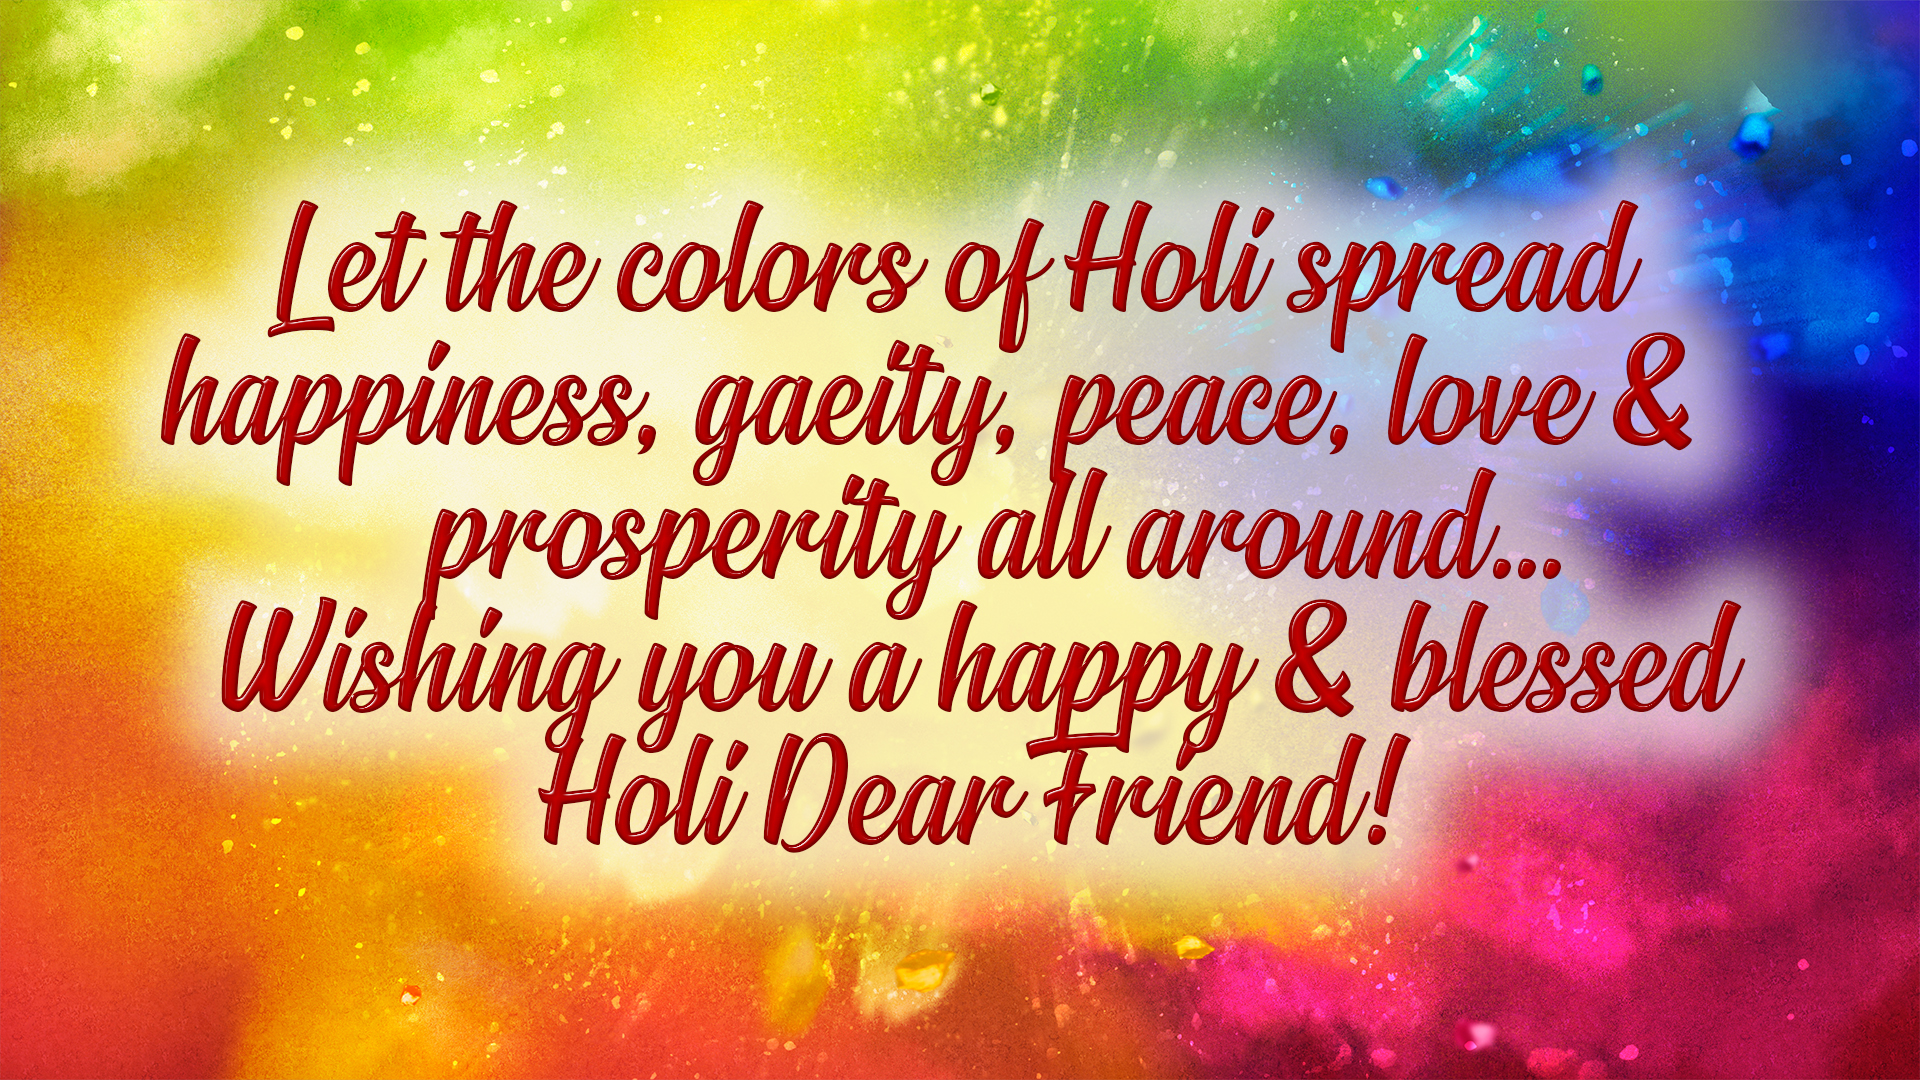 holi wishes for friend image